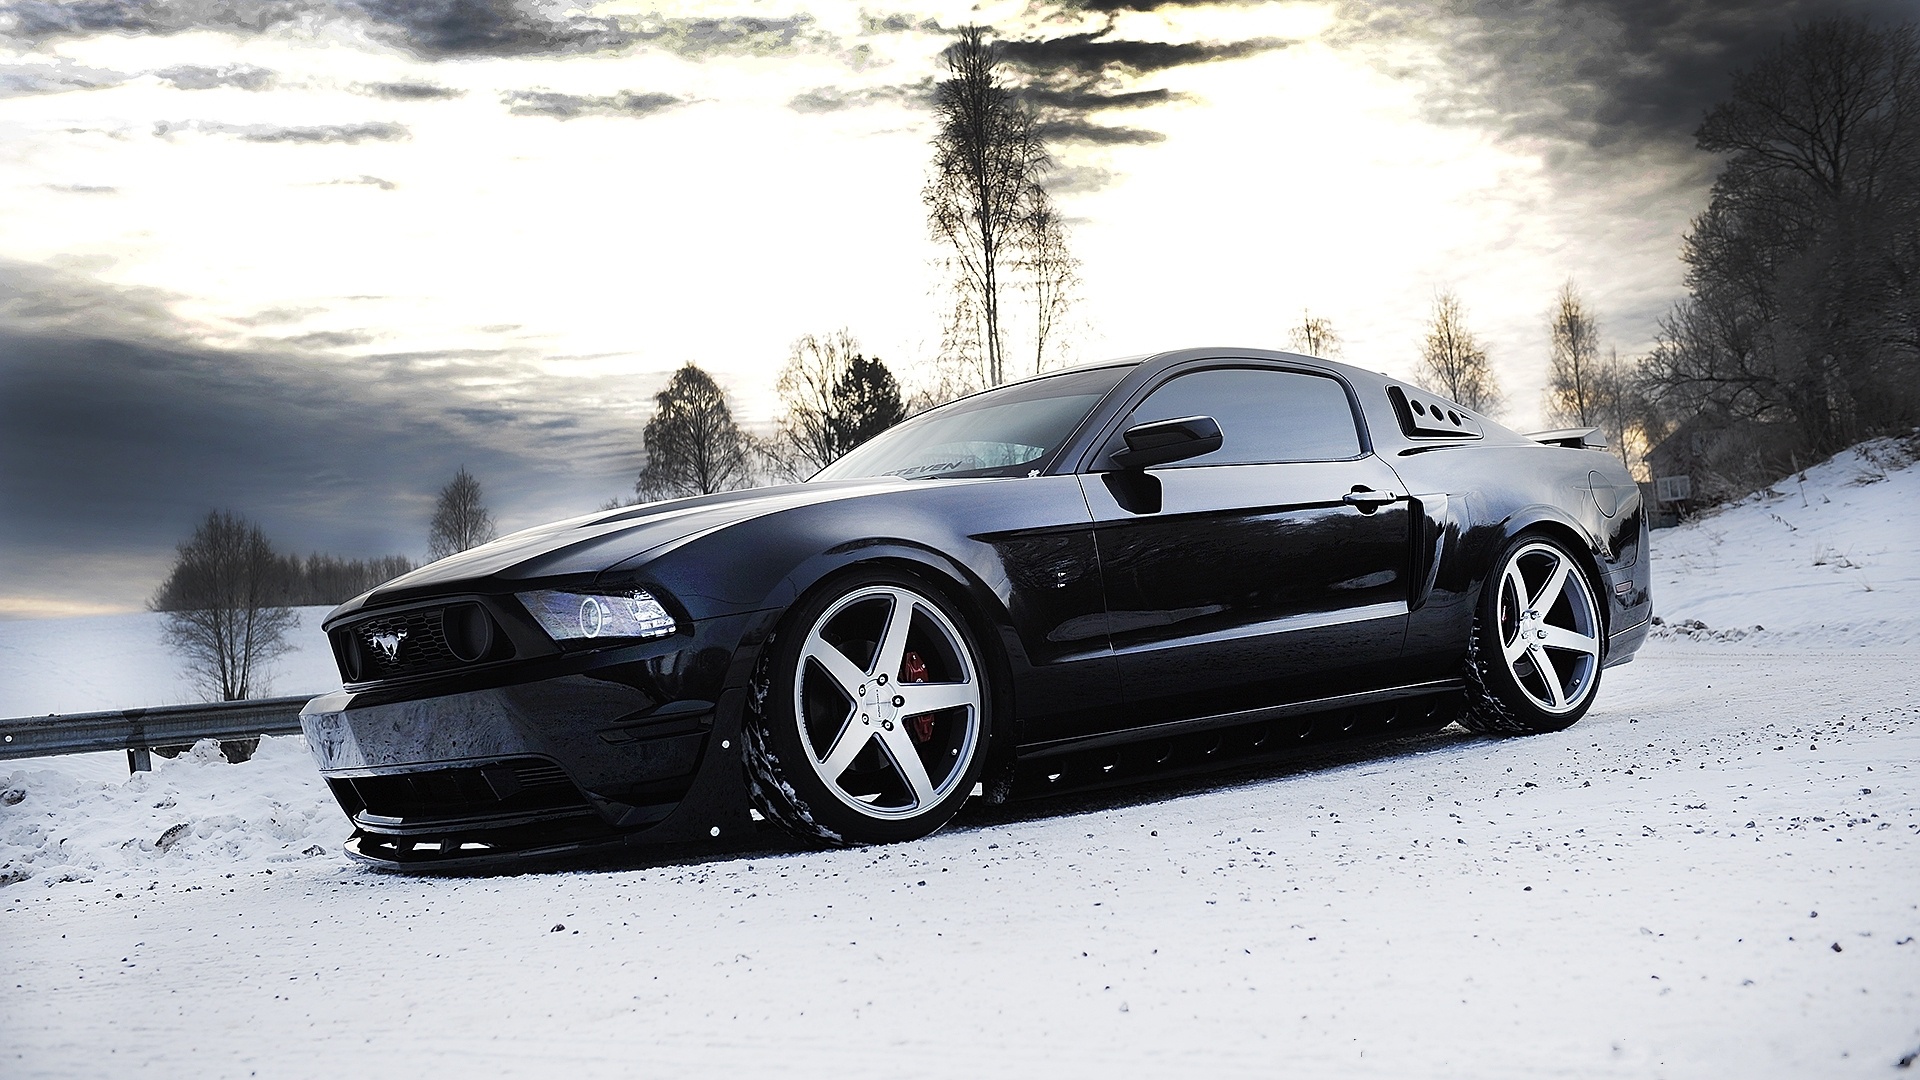 Ford Mustang , HD Wallpaper & Backgrounds